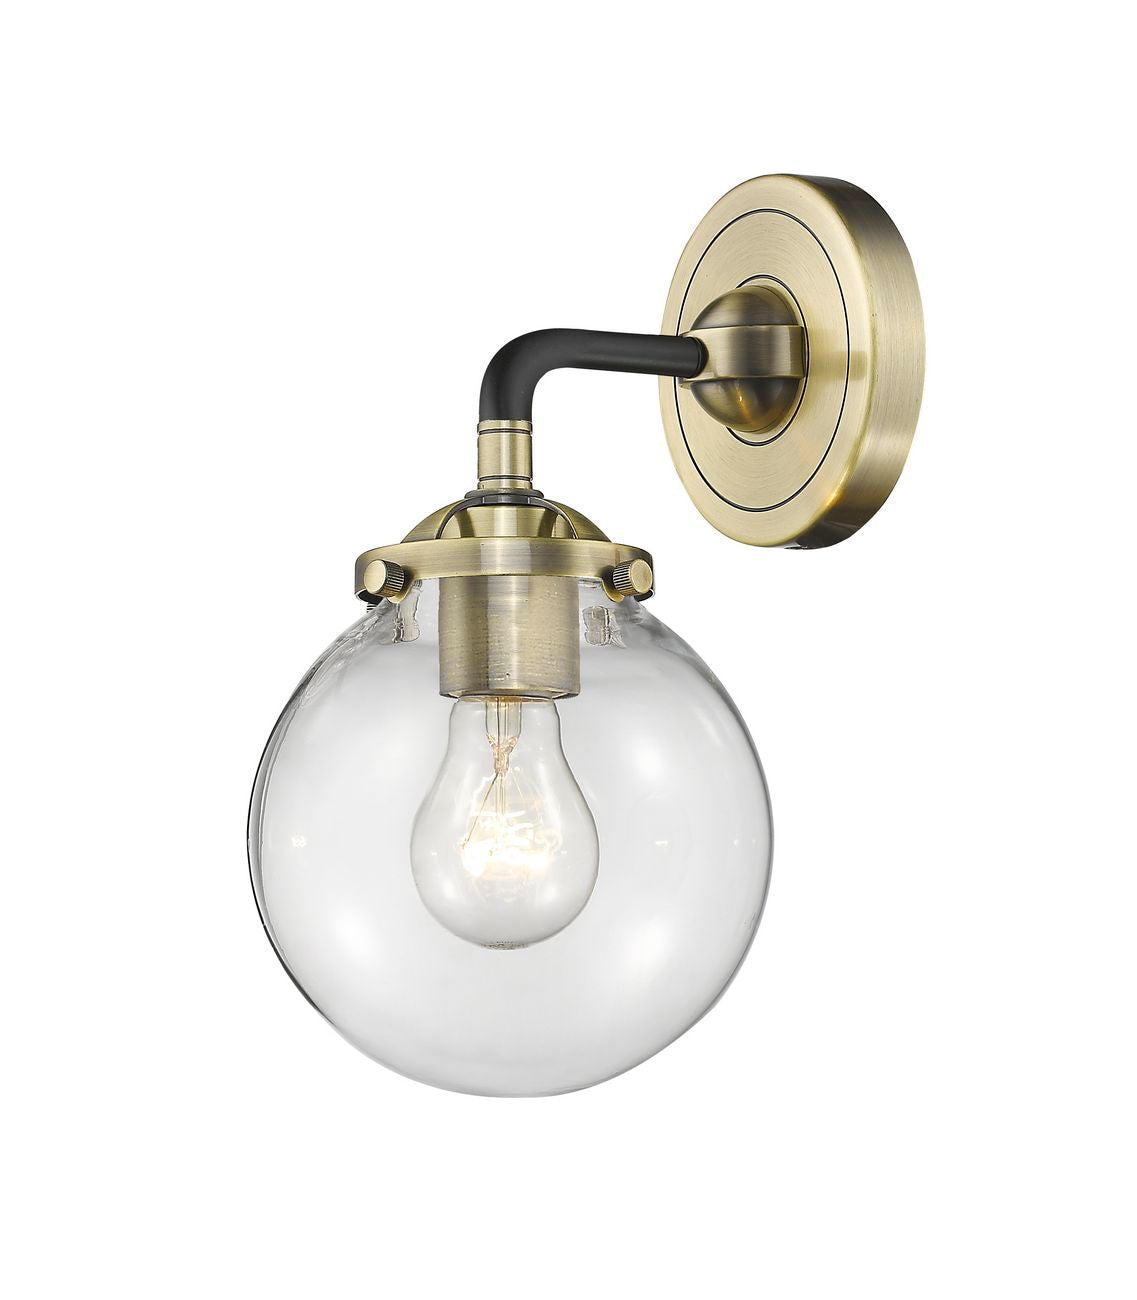 1-Light 6" Beacon Sconce - Globe-Orb Clear Glass - Choice of Finish And Incandesent Or LED Bulbs